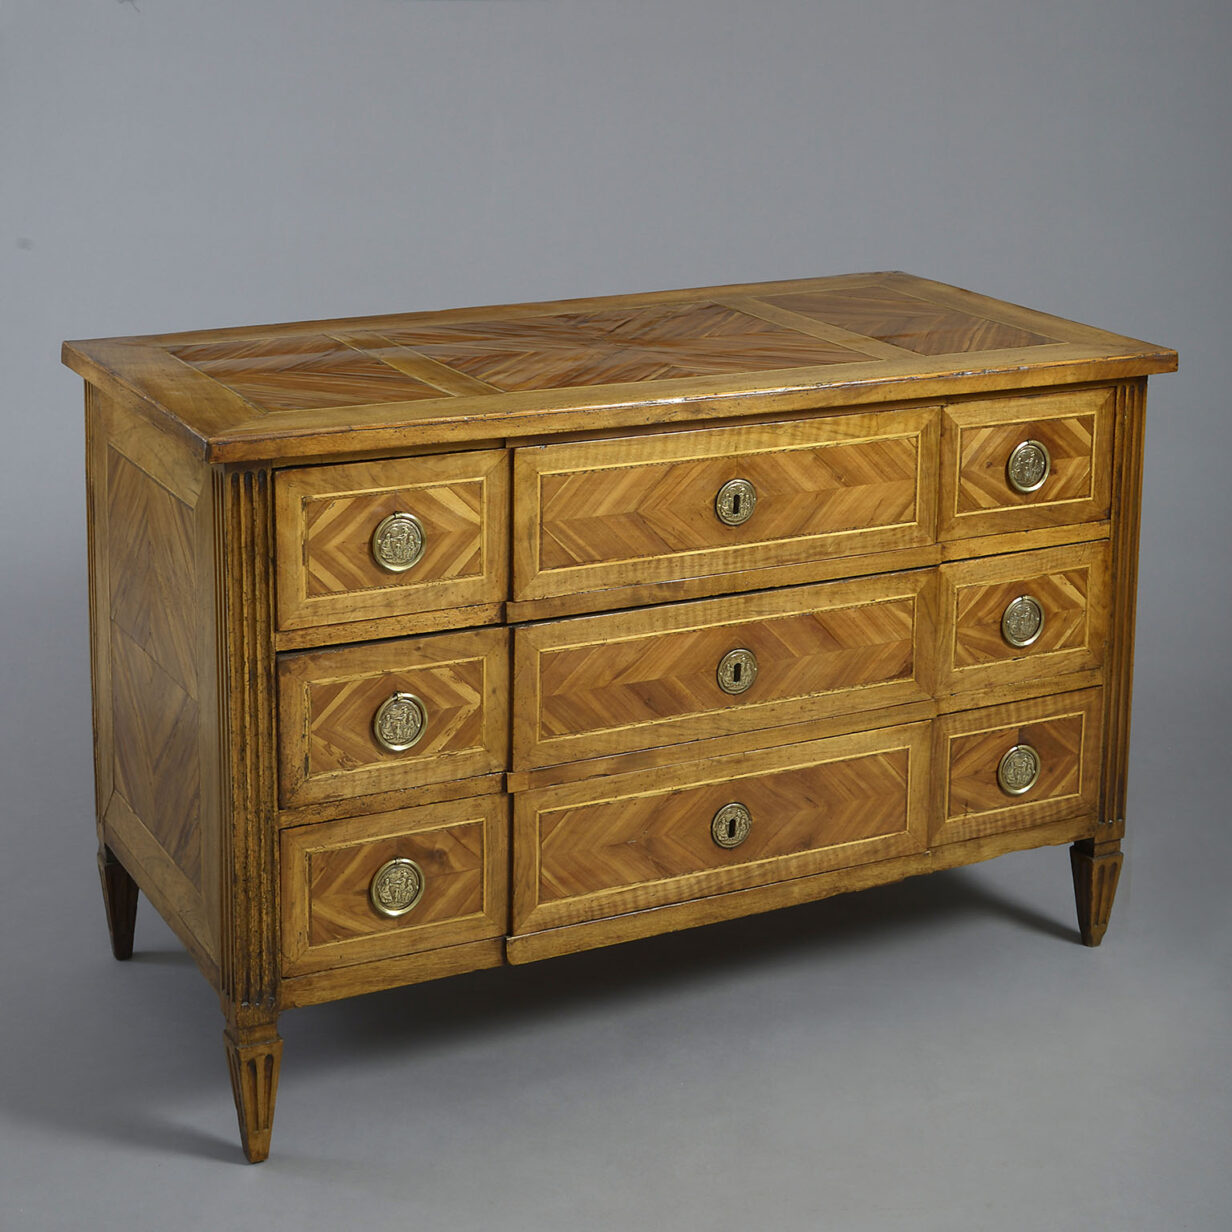 Late 18th Century Neo-classical Walnut Commode